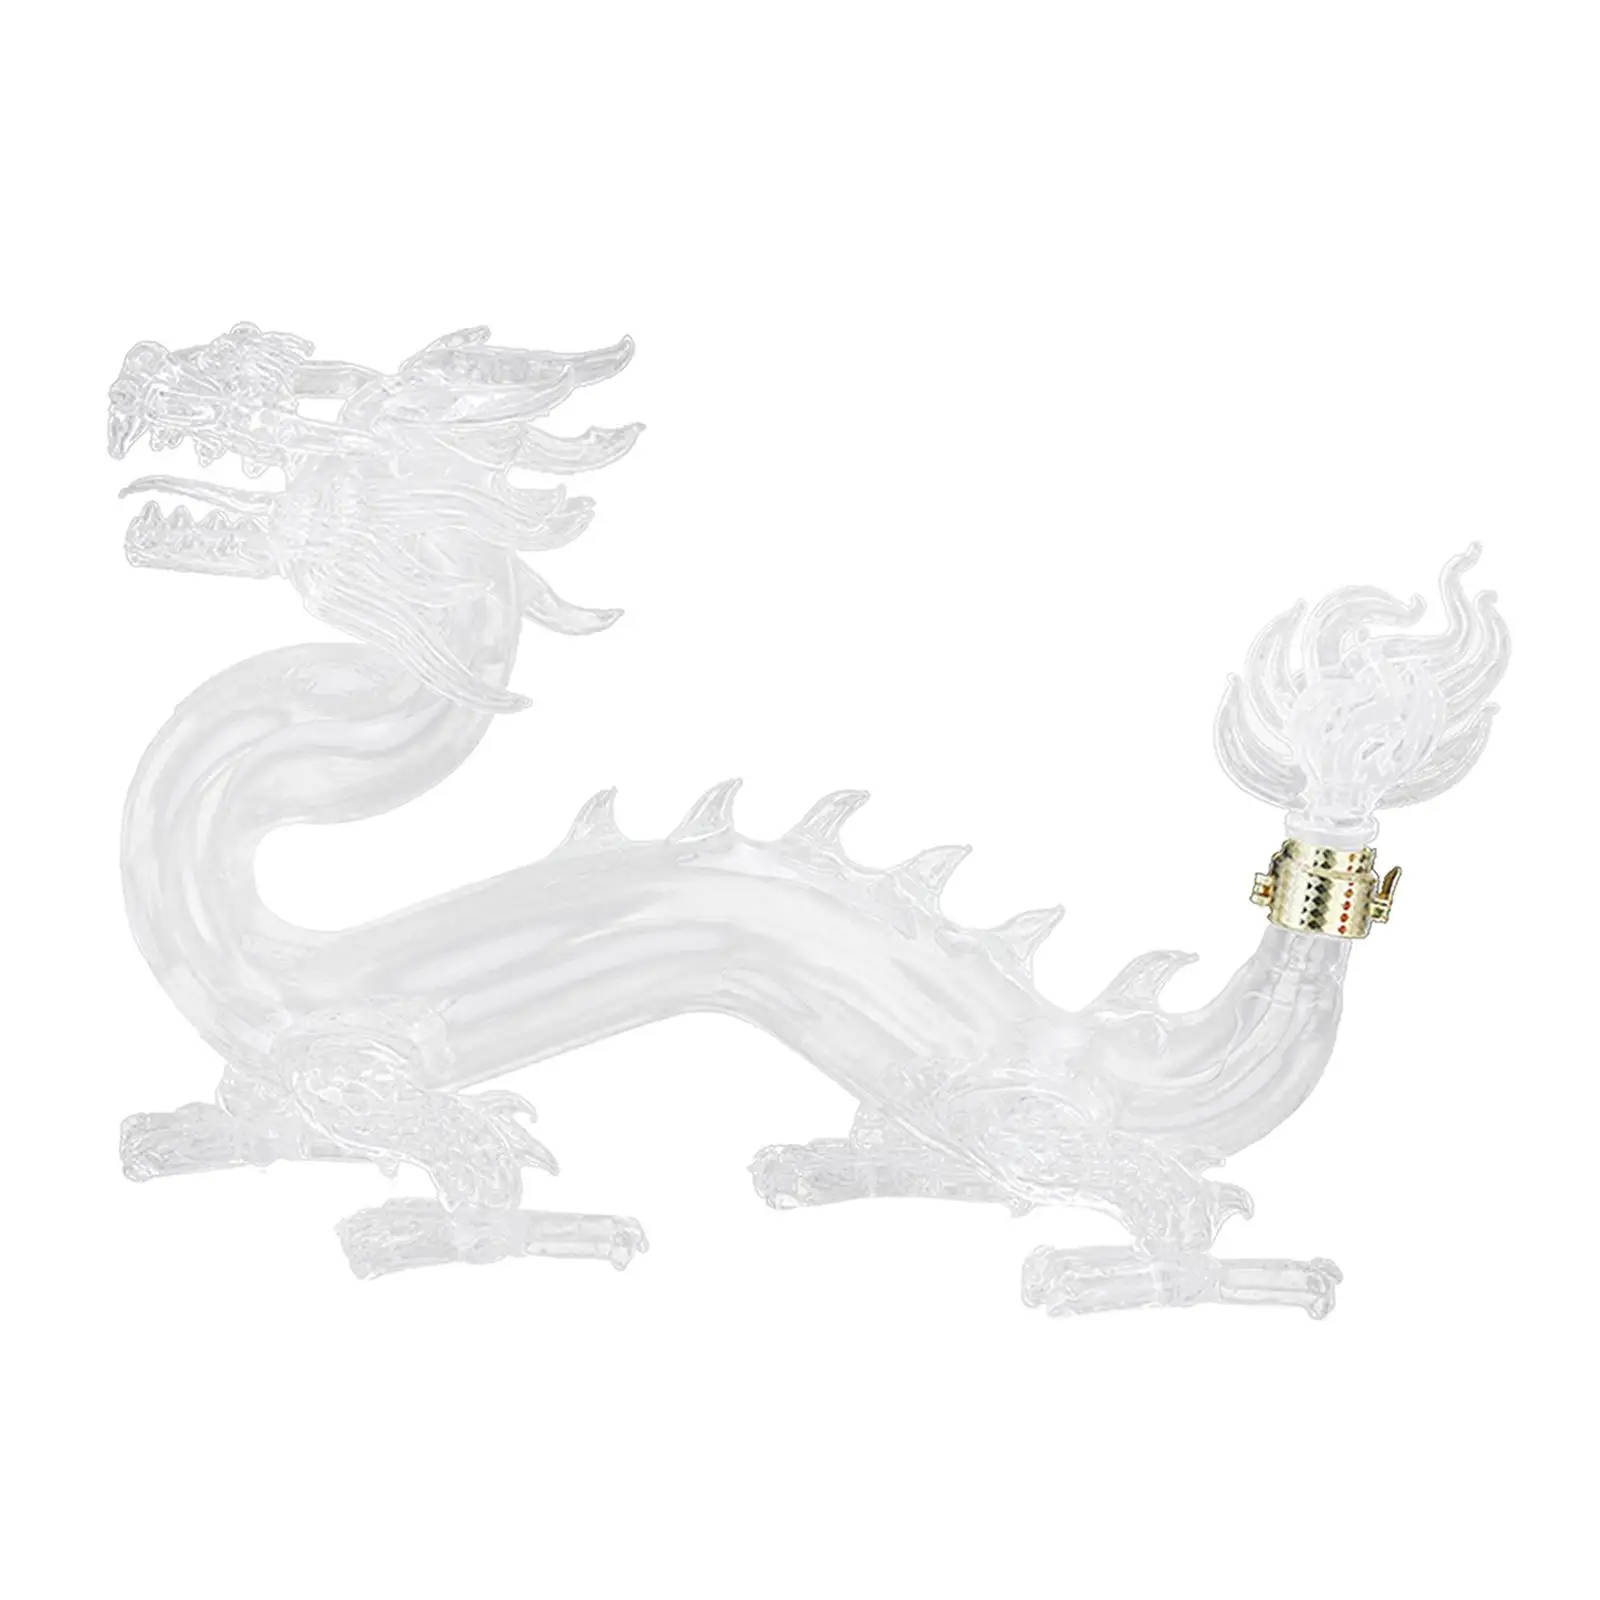 Whisky Decanter Glass Dragon Figurine Gifts Liquor Entertaining Barware Vodka Rum Tequila for Home Restaurant Bar Dining Adults